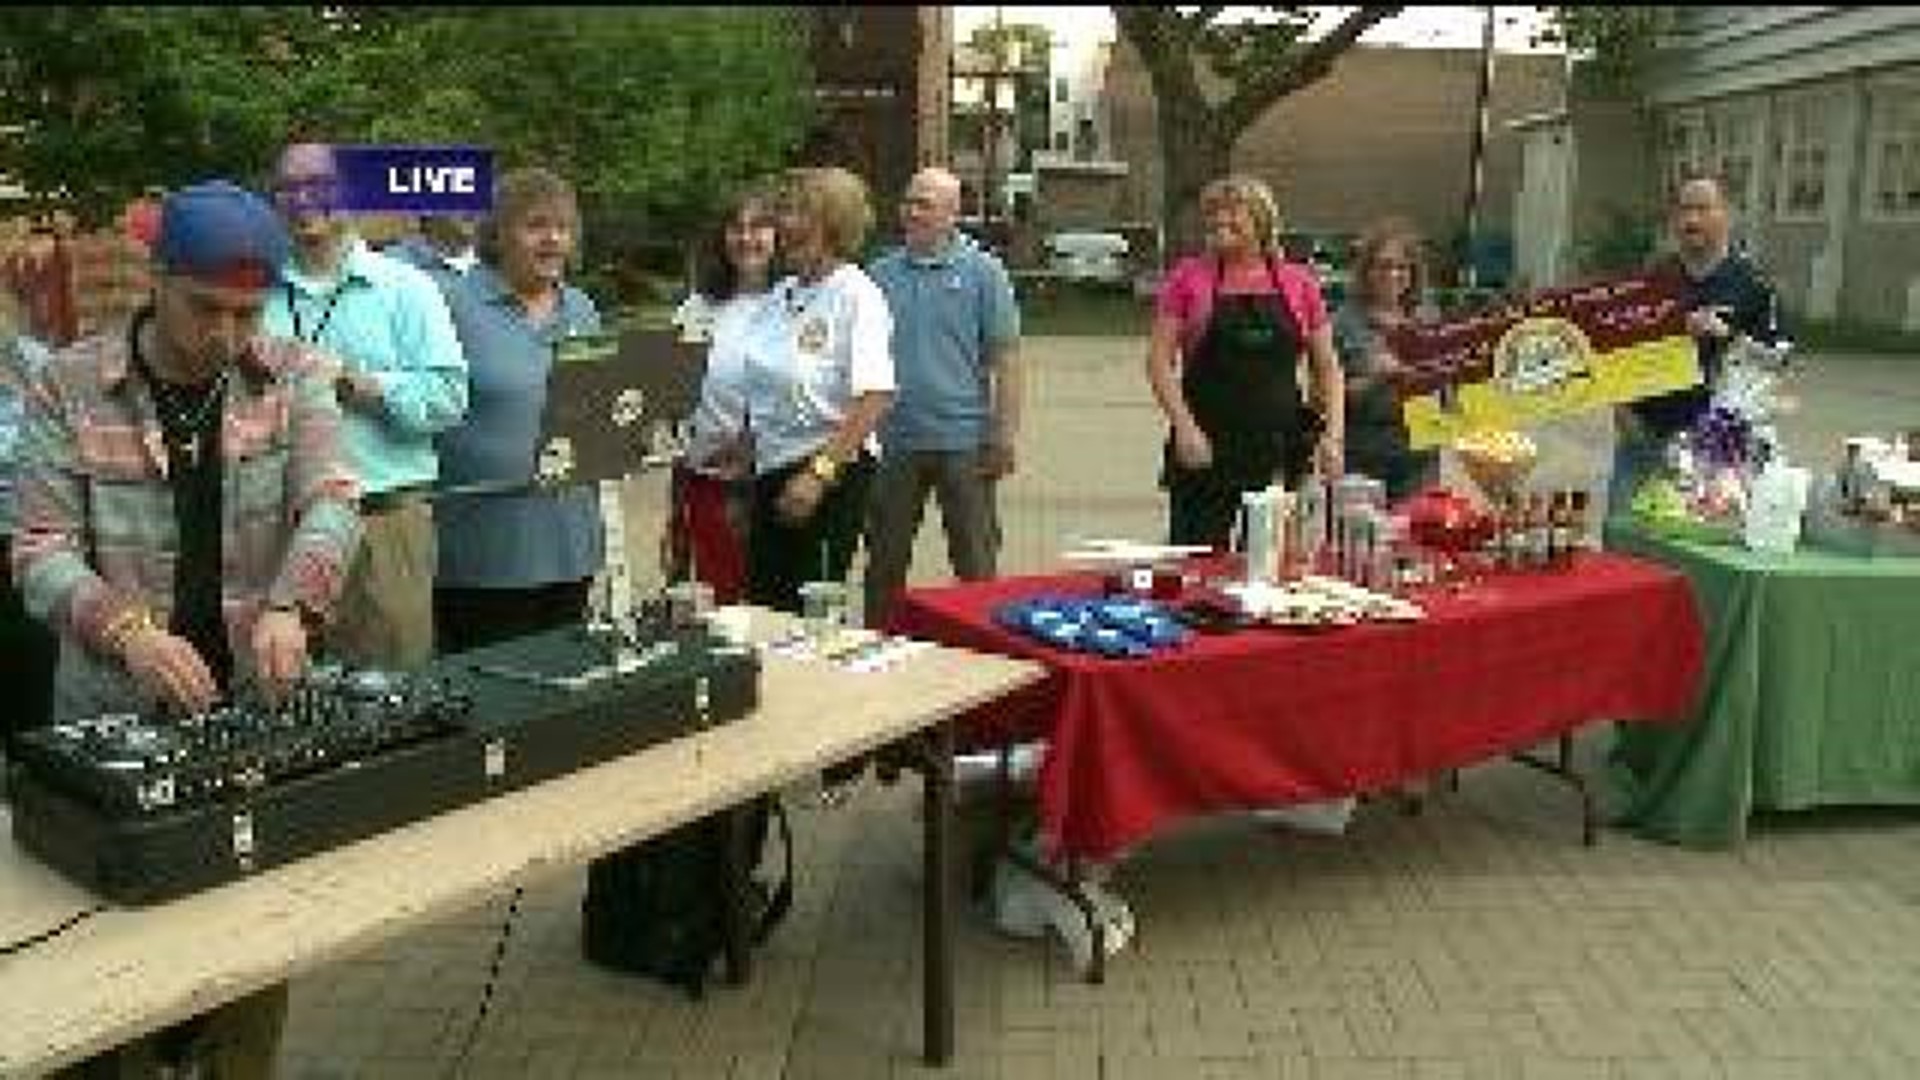 Brewsterhout: Summertime Tradition Goes to New Levels